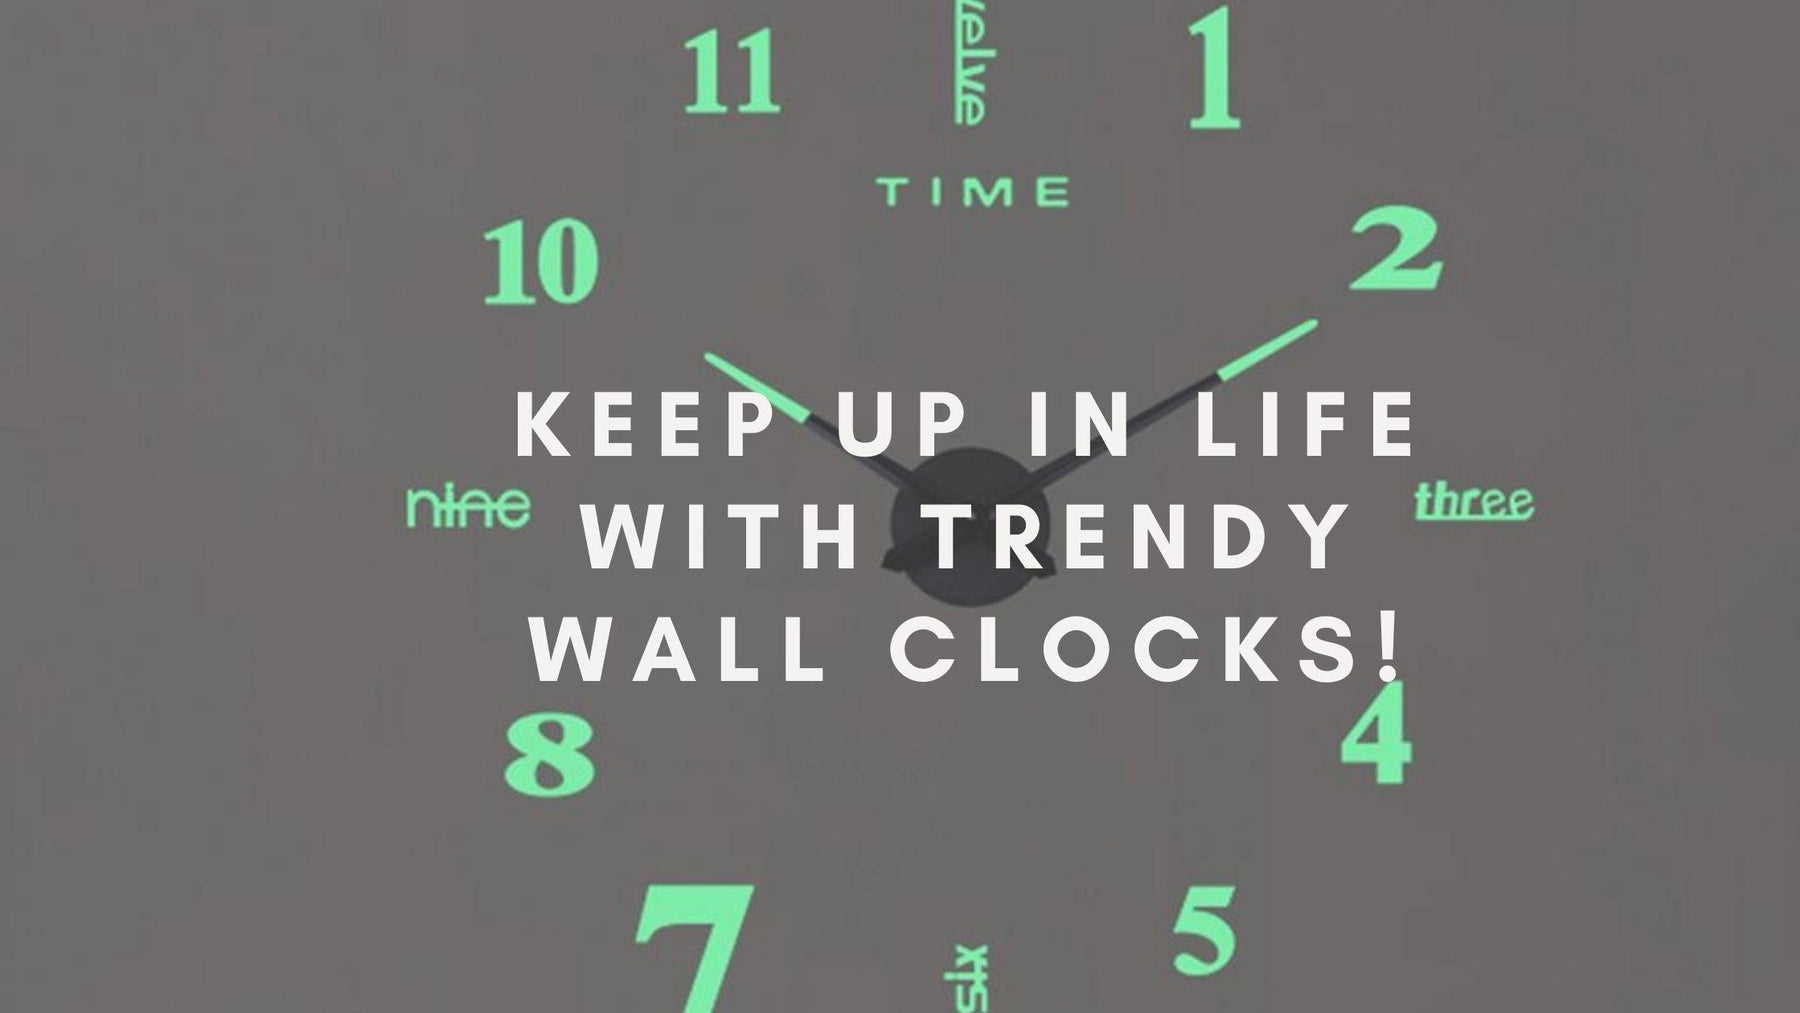 Keep up in life with Trendy Wall Clocks! - WoodenTwist